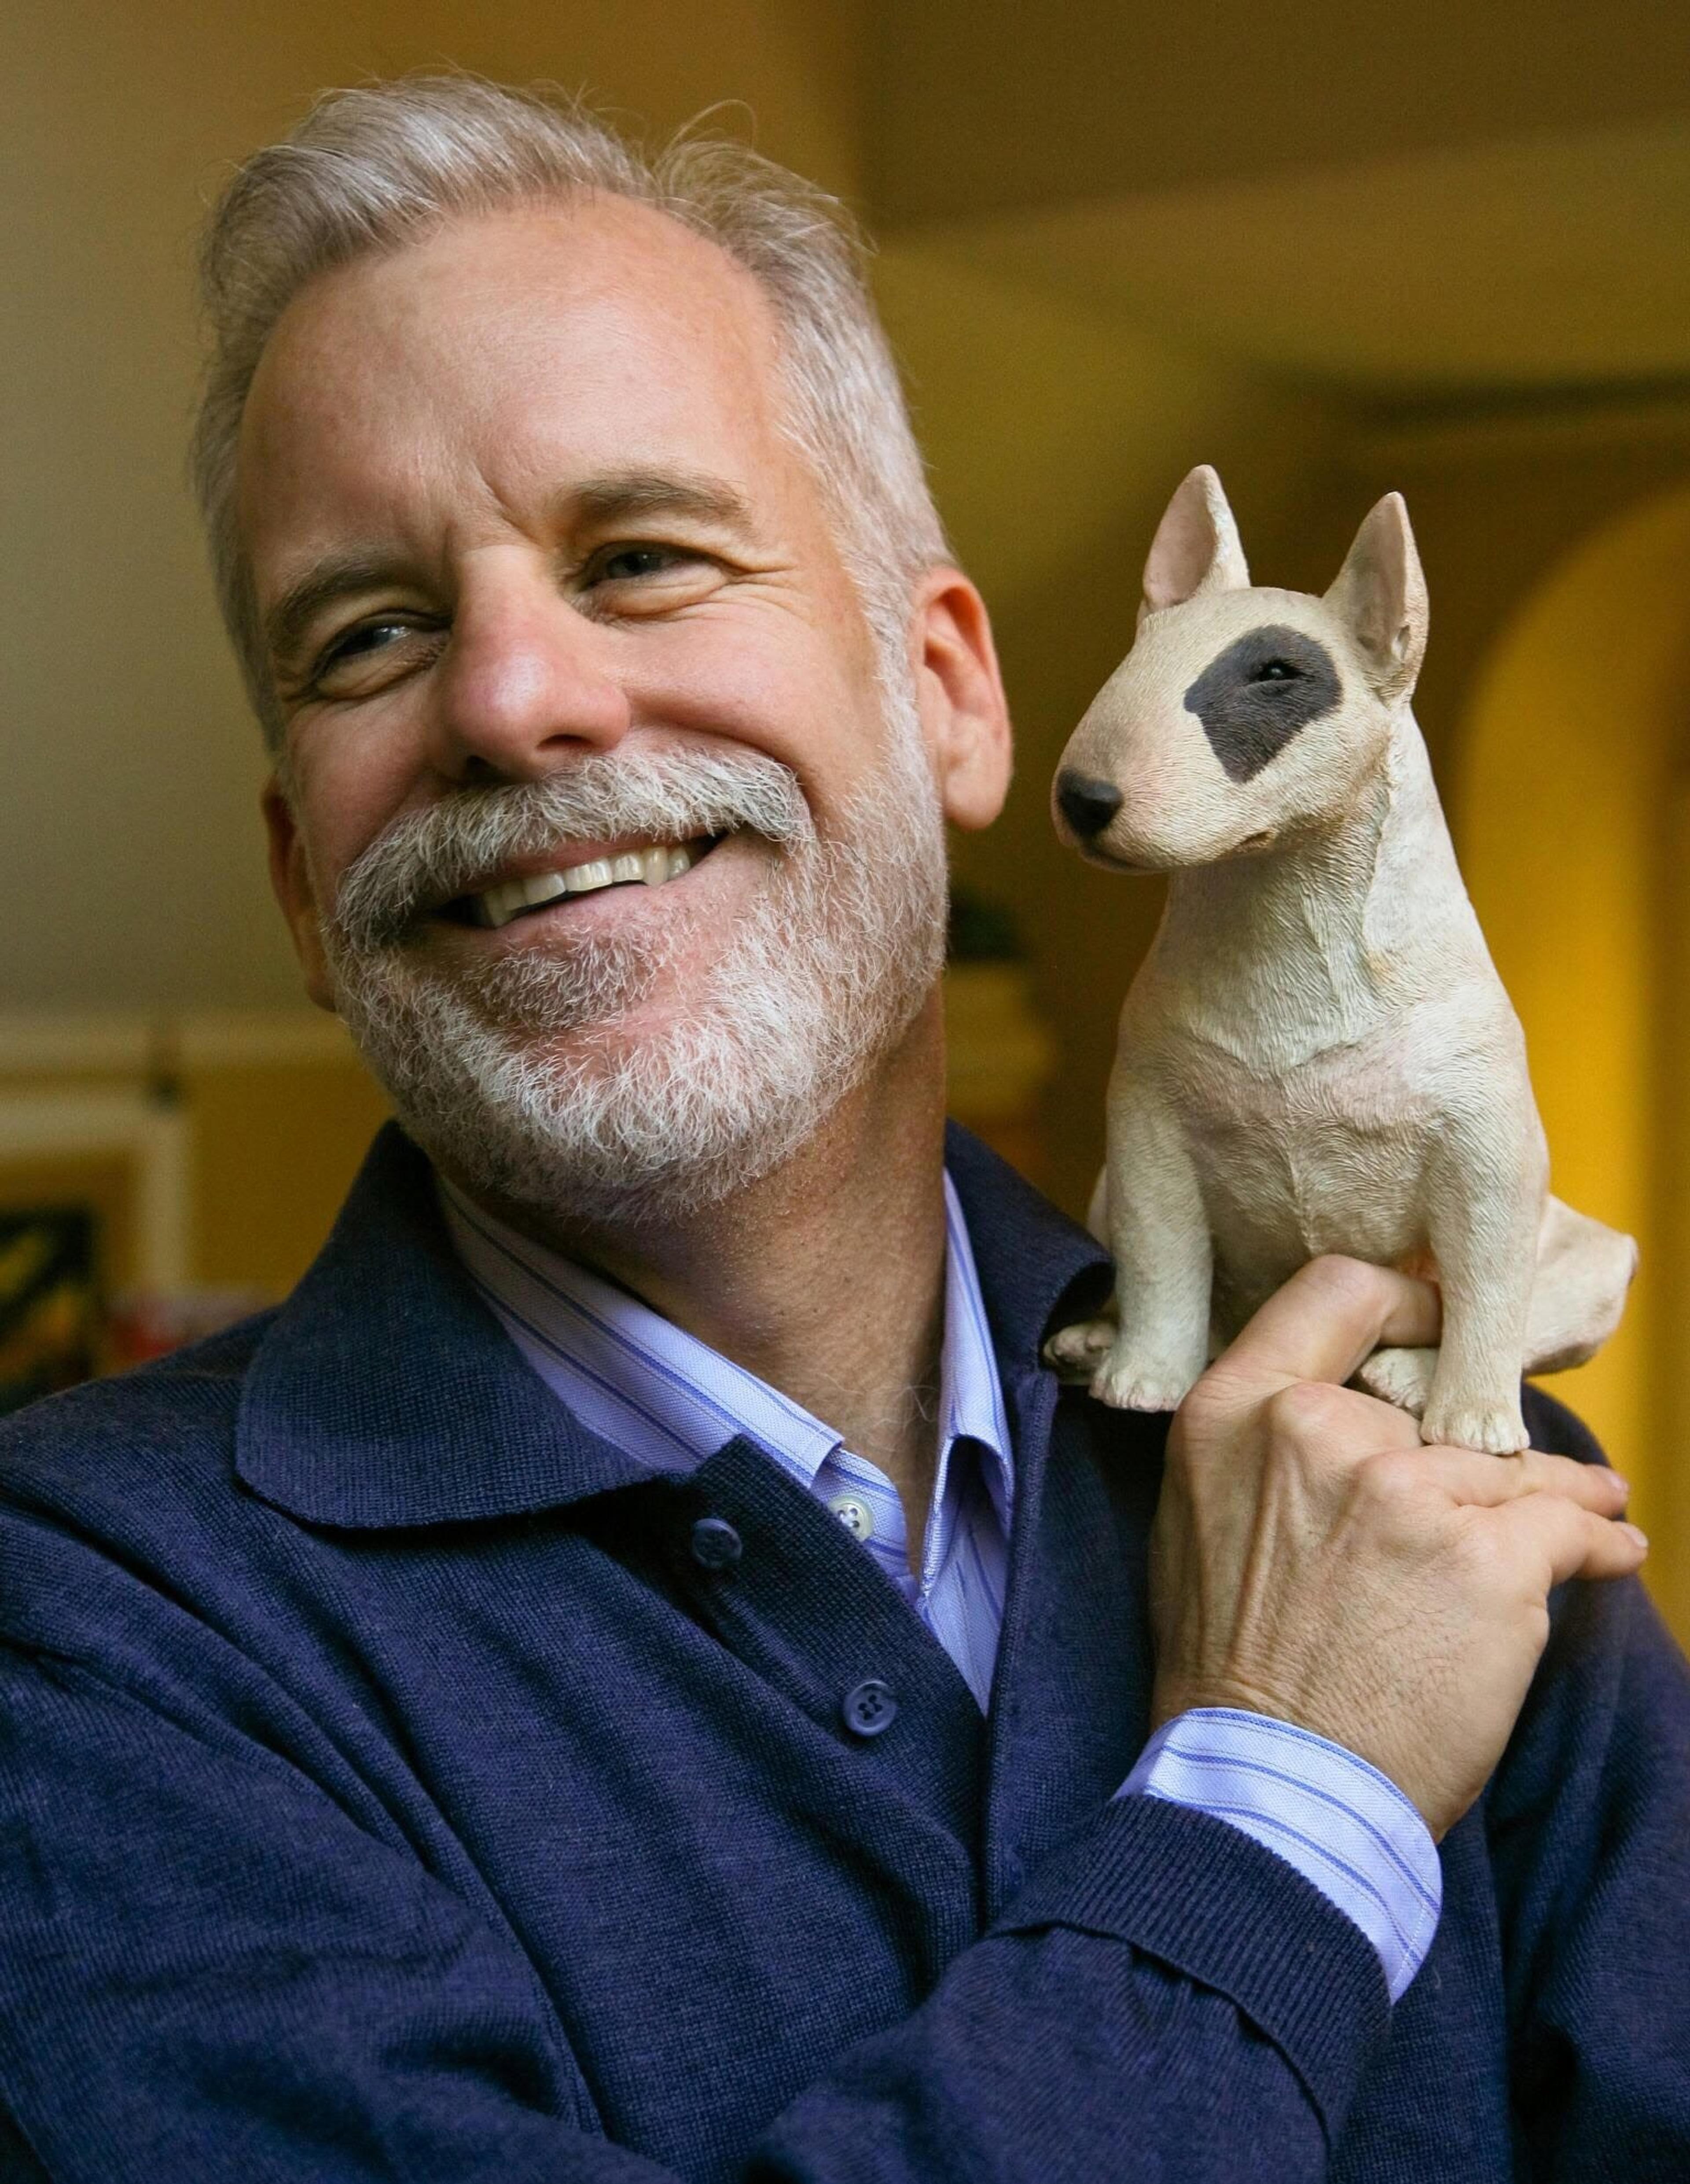 Chris VanAllsburg with a tiny dog perched on his shoulder.